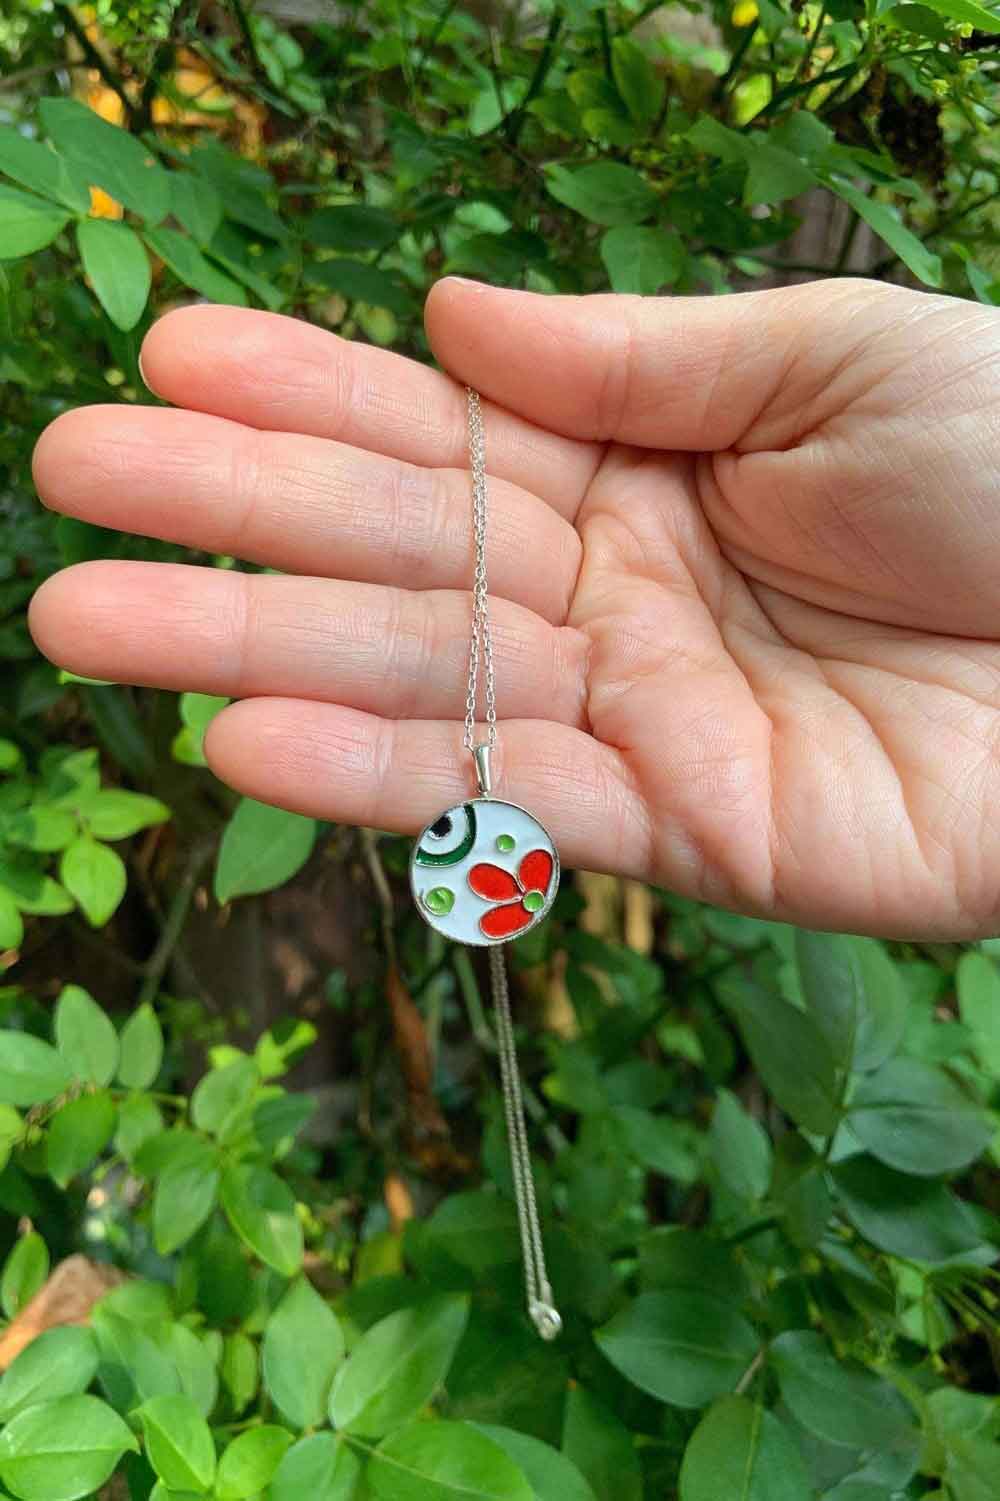 CLOISONNE ENAMEL SILVER Necklace, Floral Necklace, Personalized Gift, Love Handmade Jewelry, 925 Sterling Silver, Flower Necklace